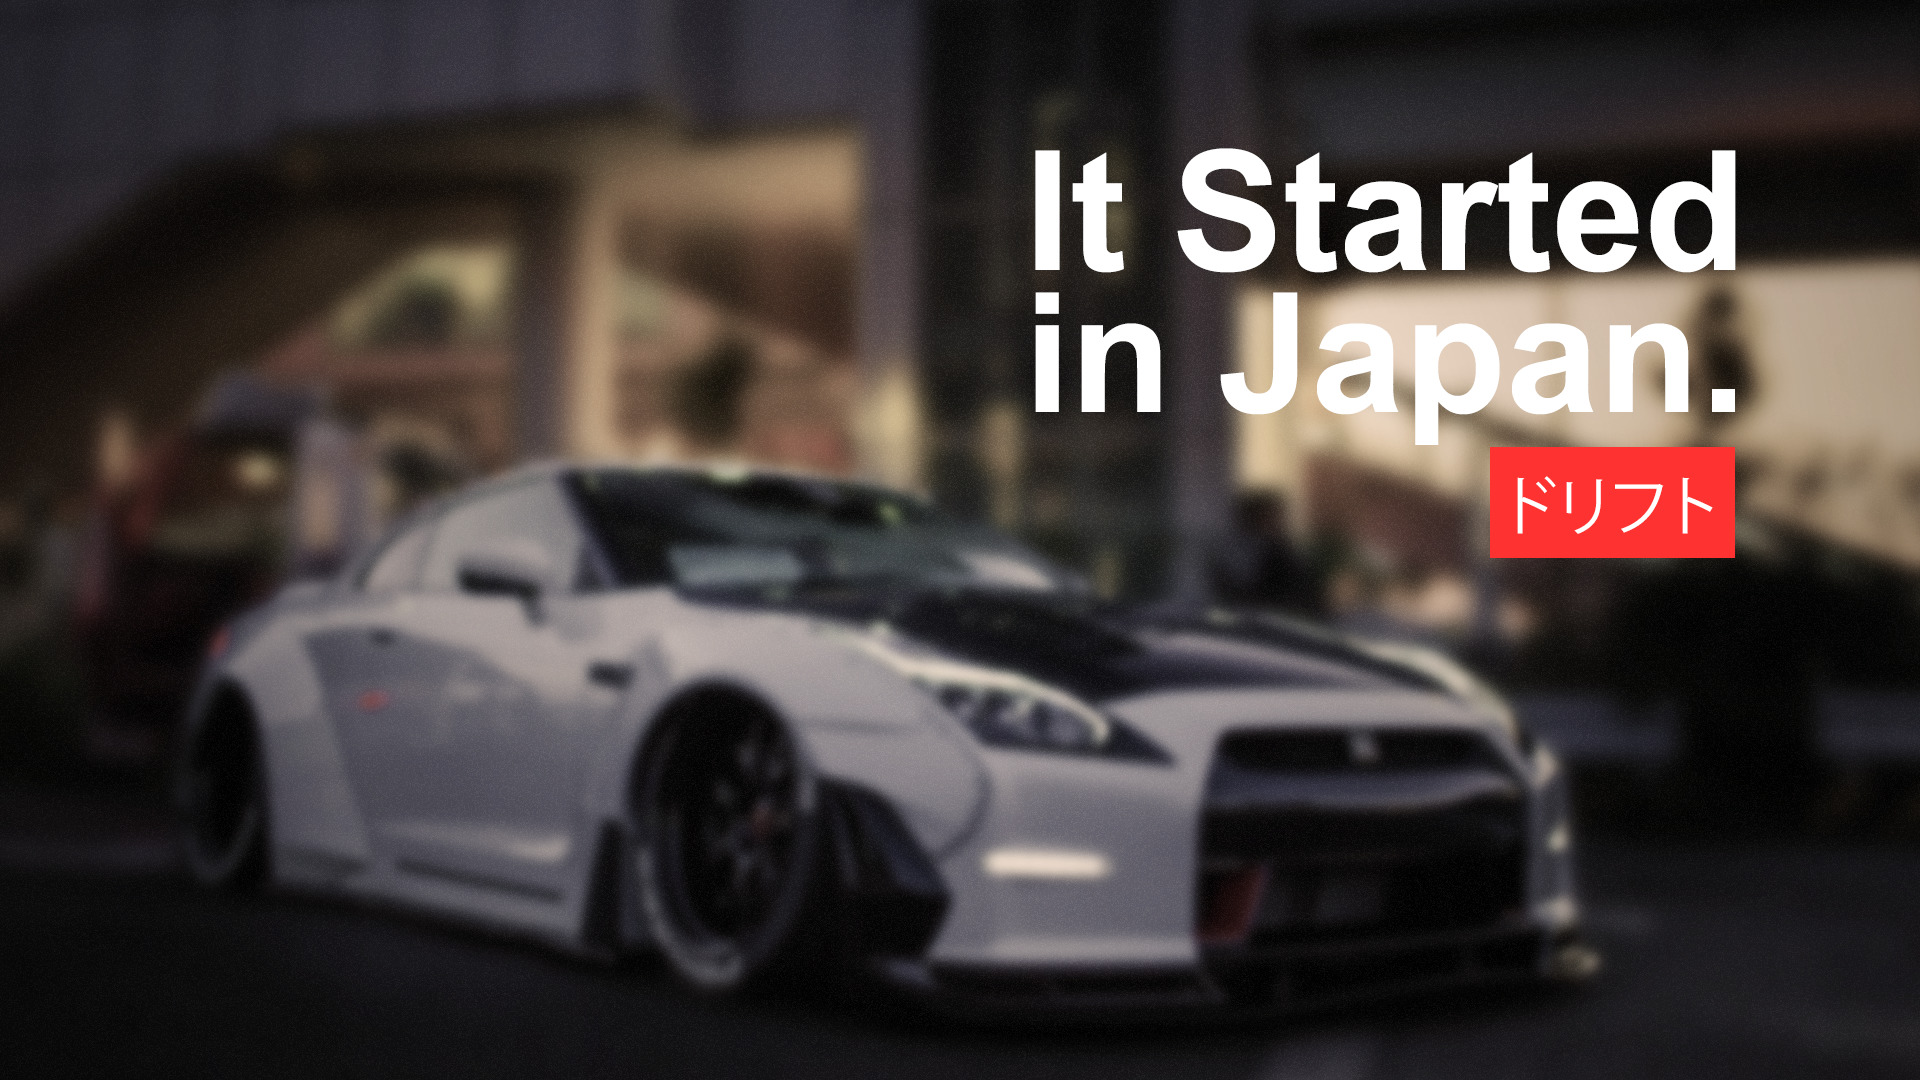 car, Japan, Drift, Drifting, Racing, Vehicle, Japanese Cars, Import, Tuning, Modified, Nissan, Nissan GTR, It Started In Japan Wallpaper